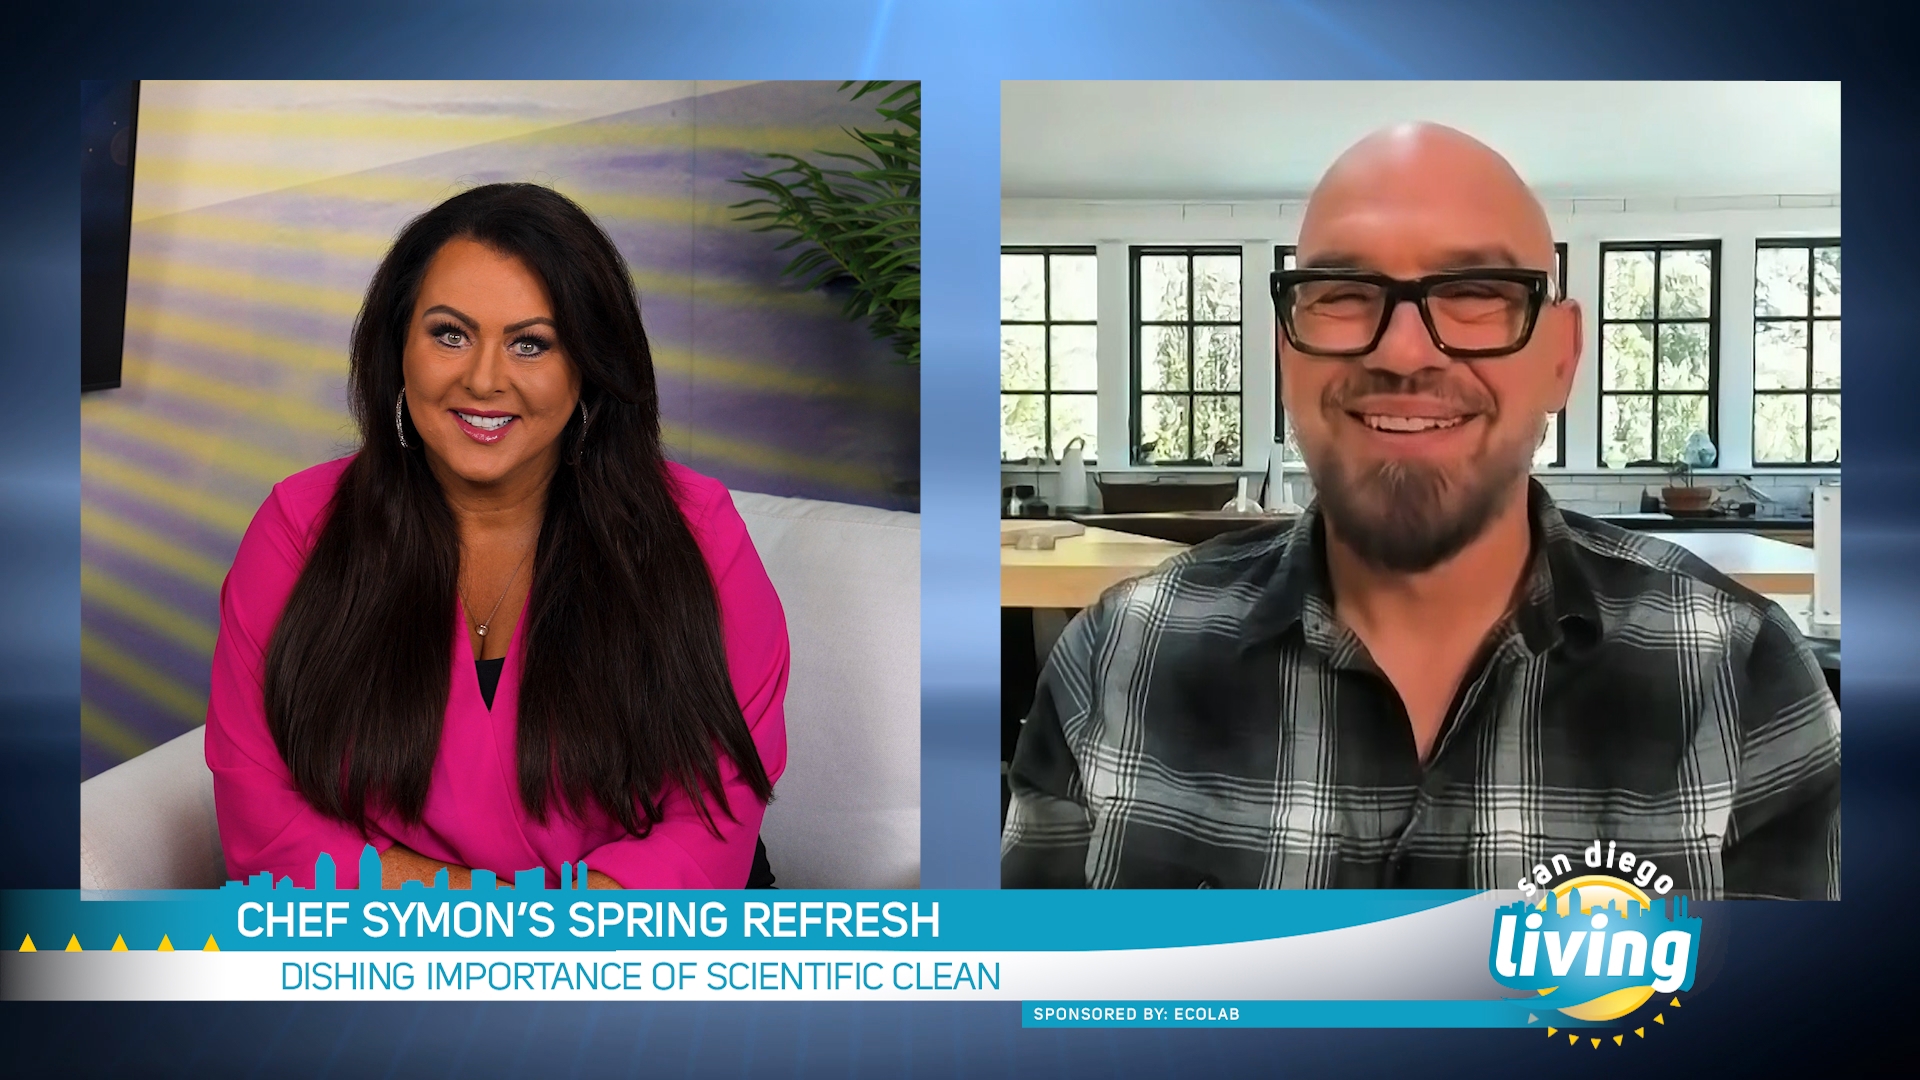 Dishing His New Hit Show & the Importance of a Scientific Clean. Sponsored by Ecolab